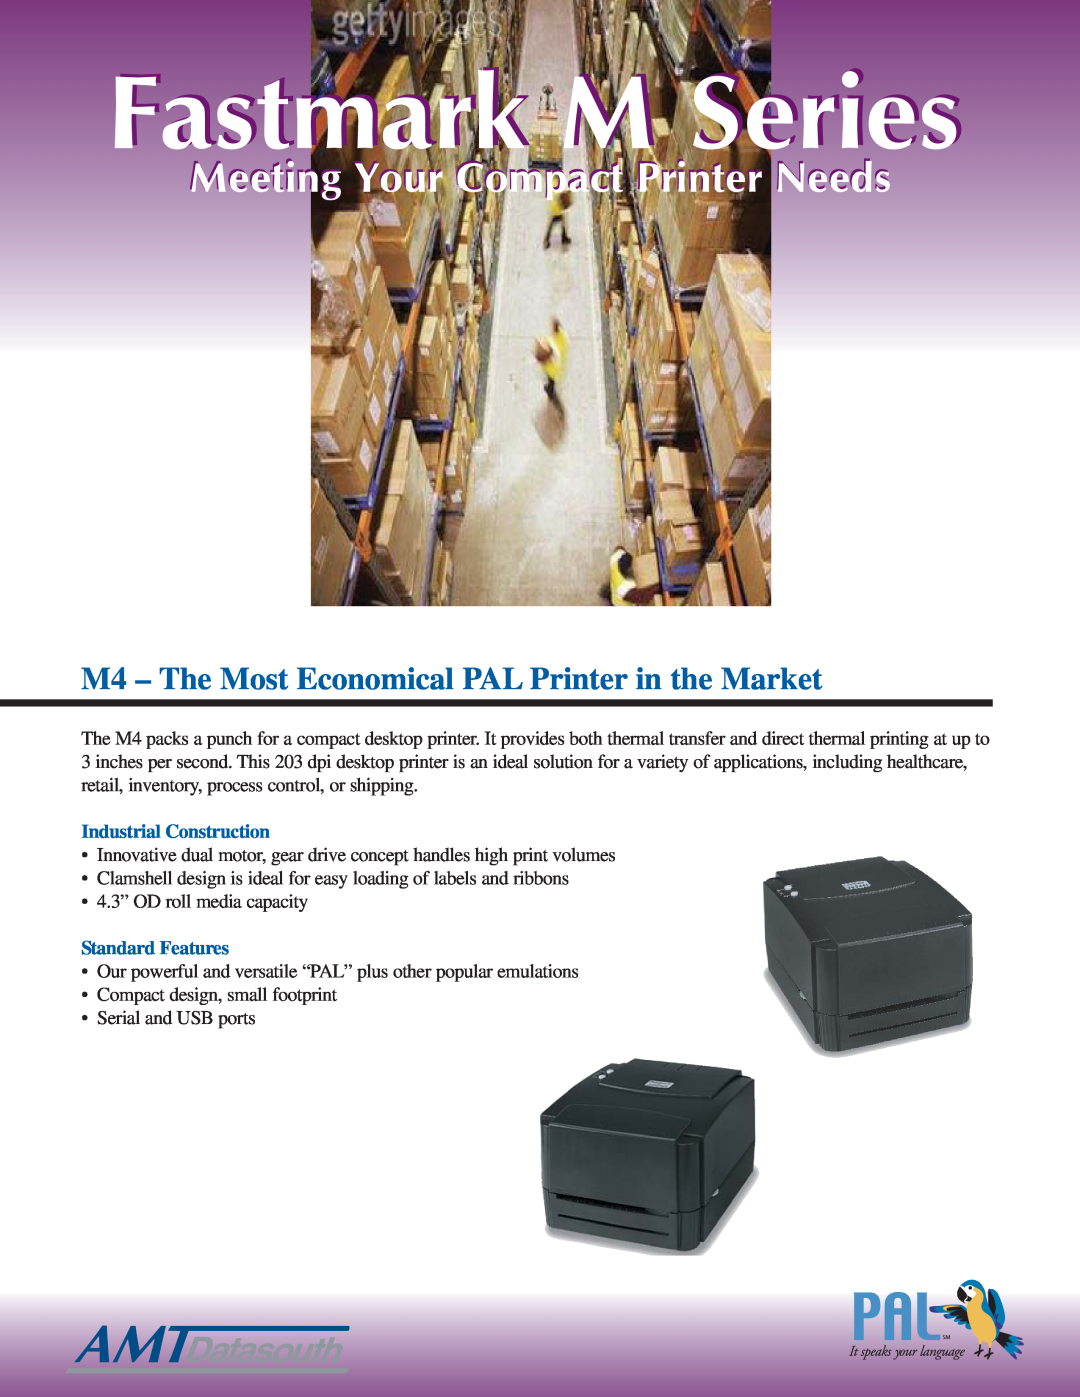 AMT Datasouth M4 Series manual Fastmark M Series, Meeting Your Compact Printer Needs, Industrial Construction 